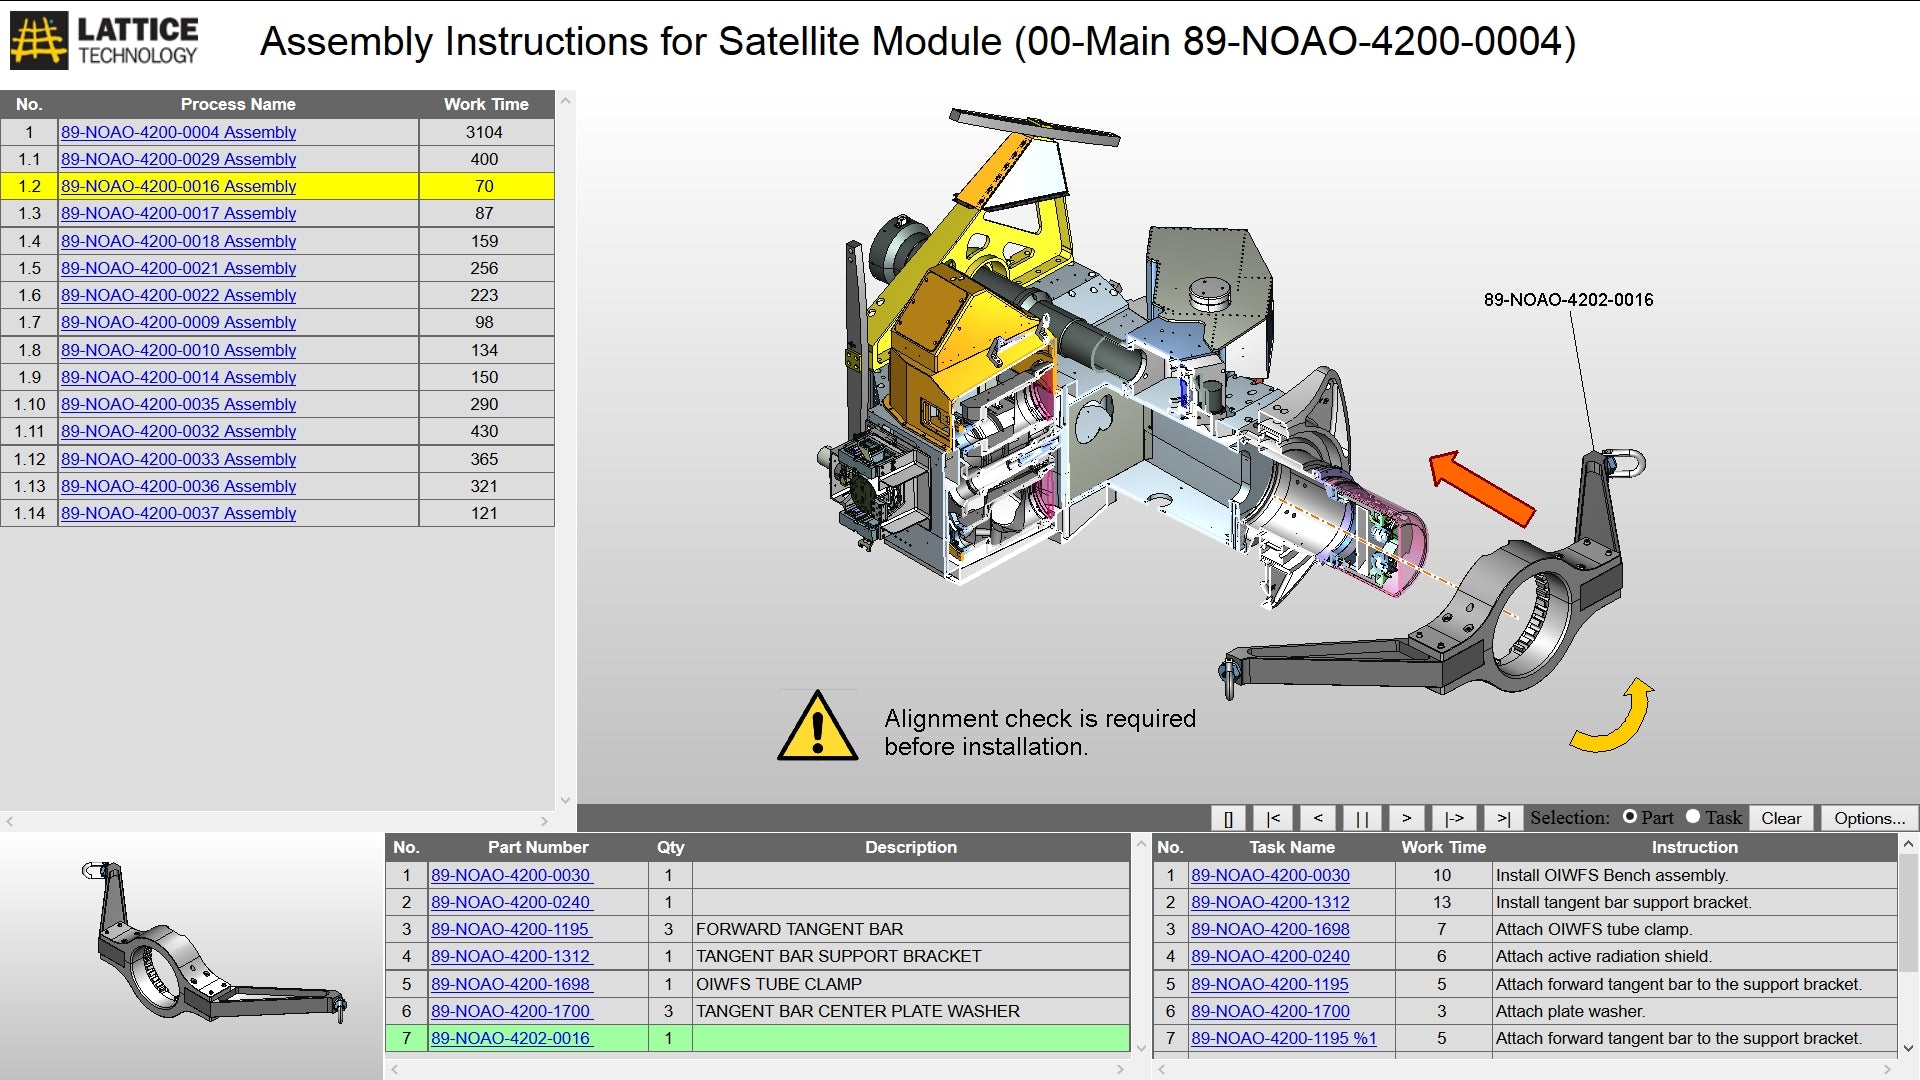 XVL Studio: Empowering Manucfacturing Engineers With the New Features!